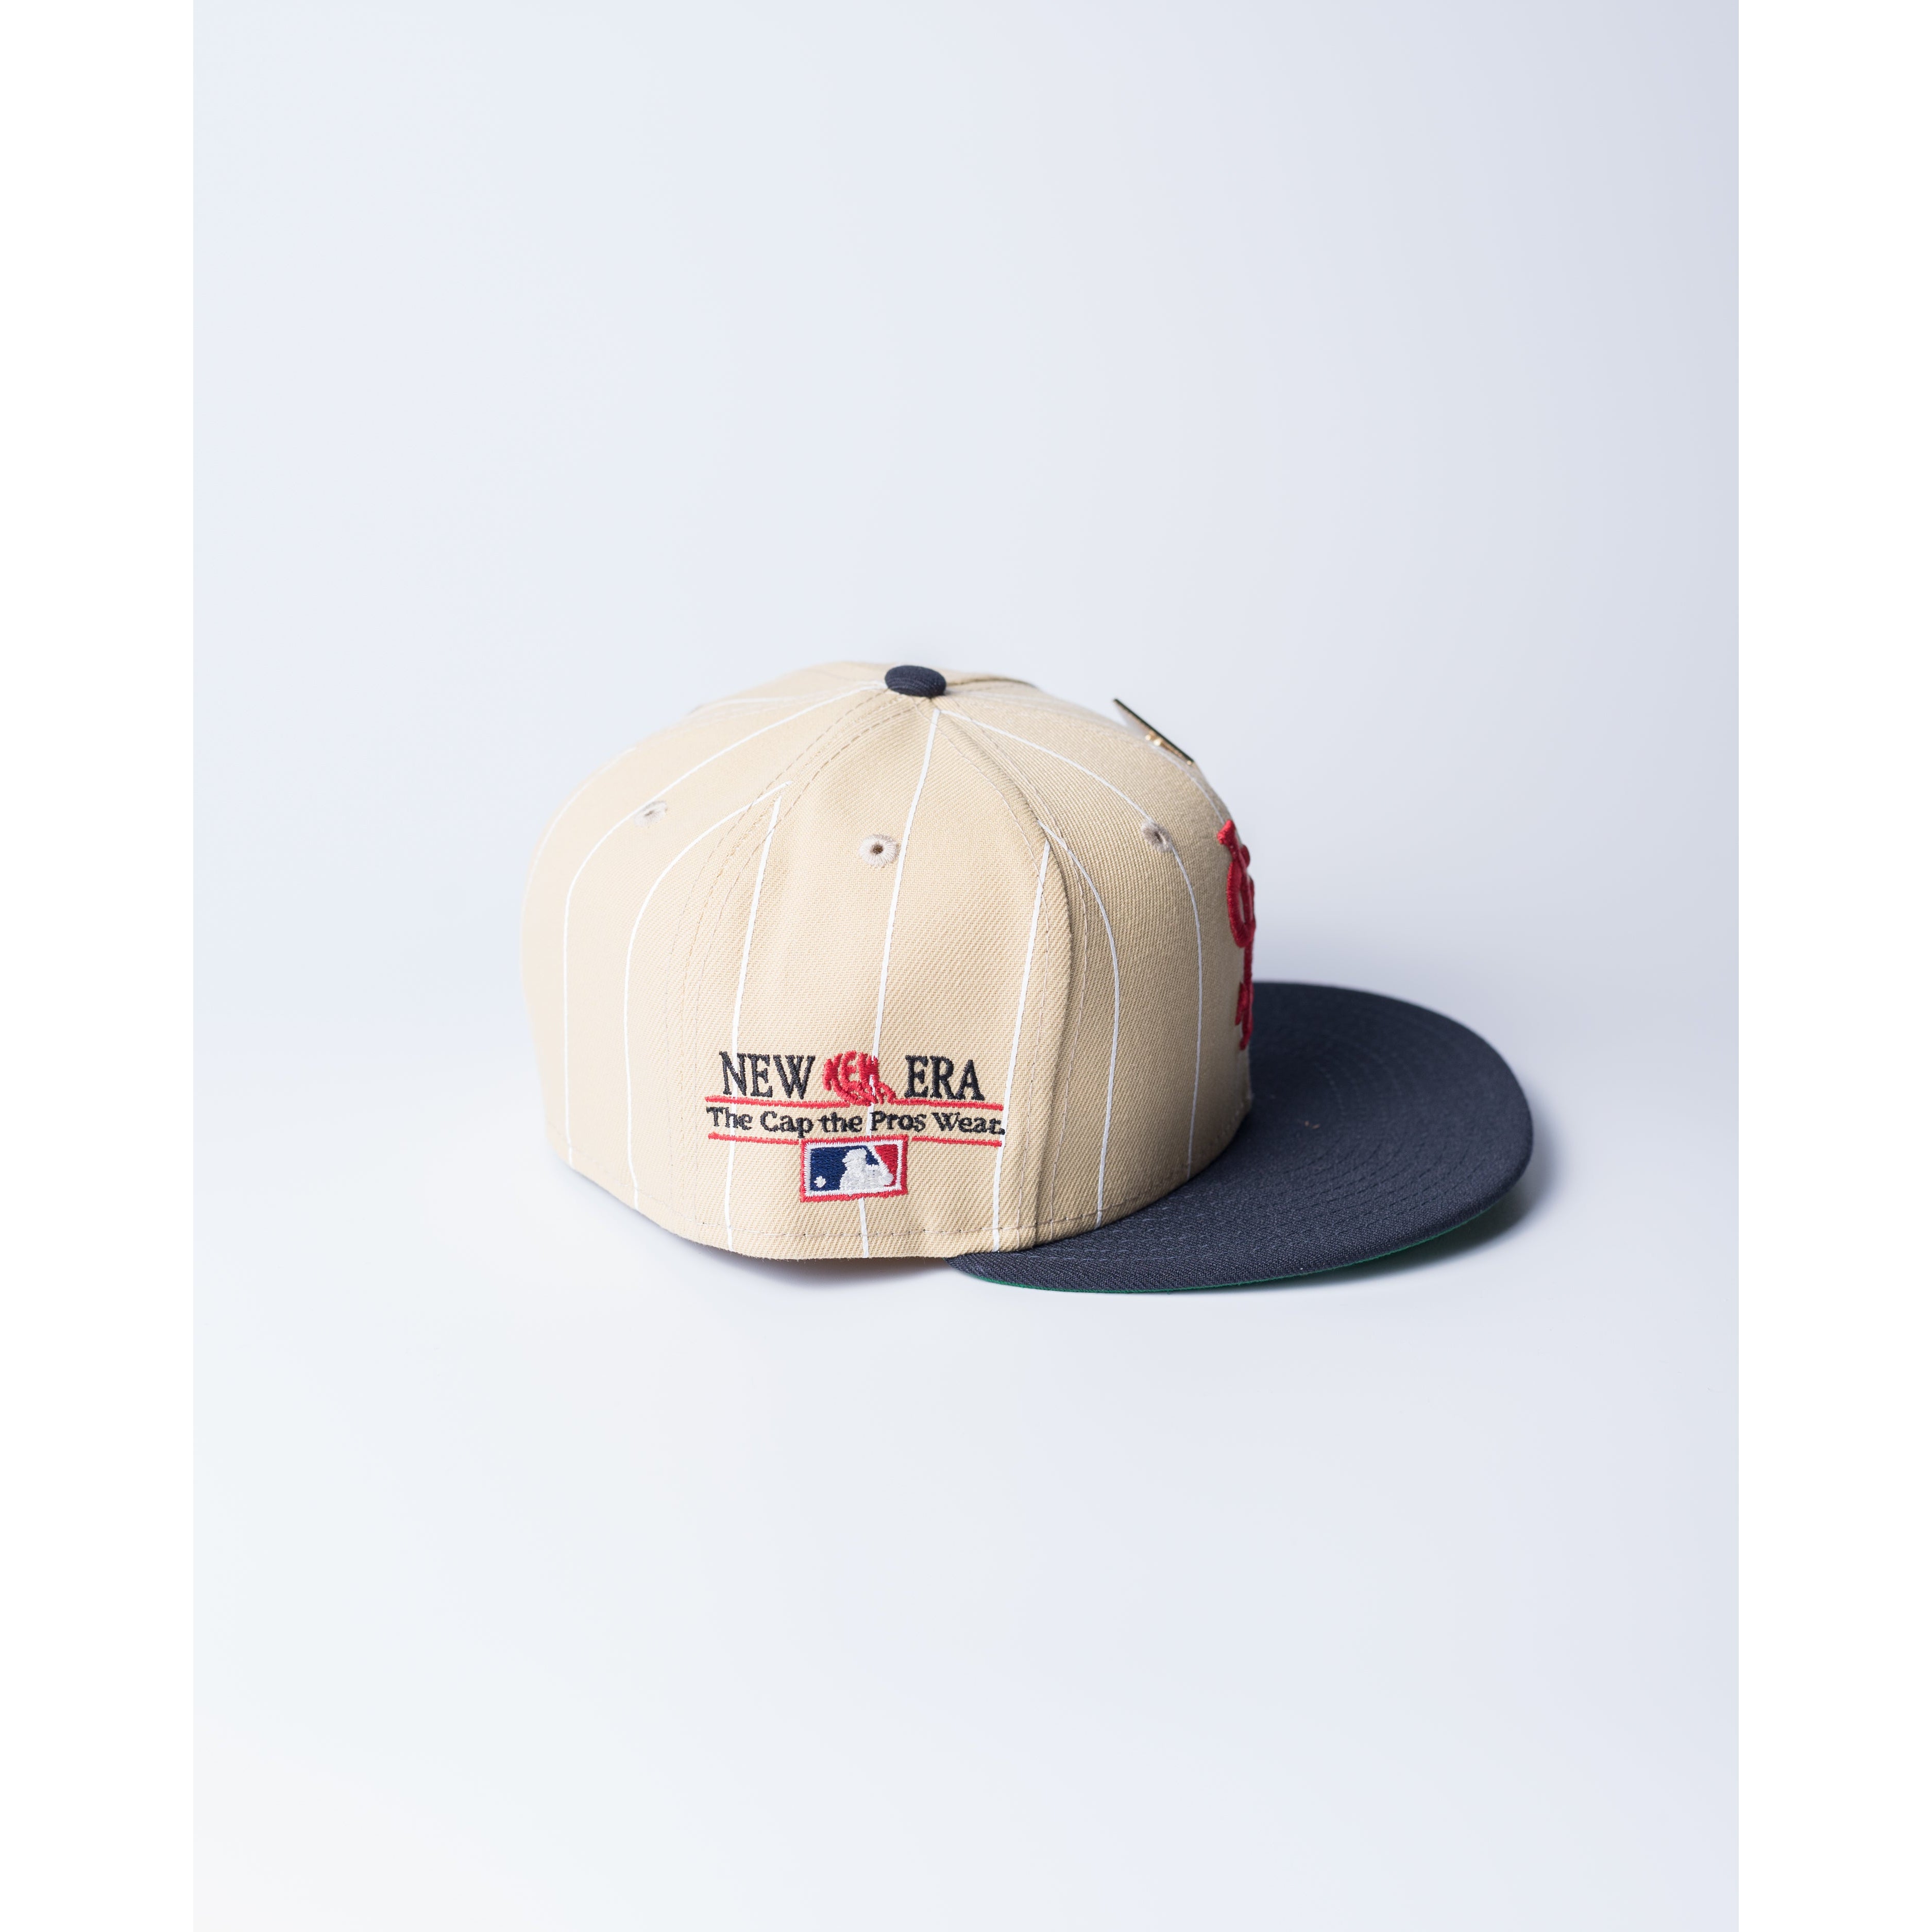 St. Louis Cardinals Pro Fitted Cap